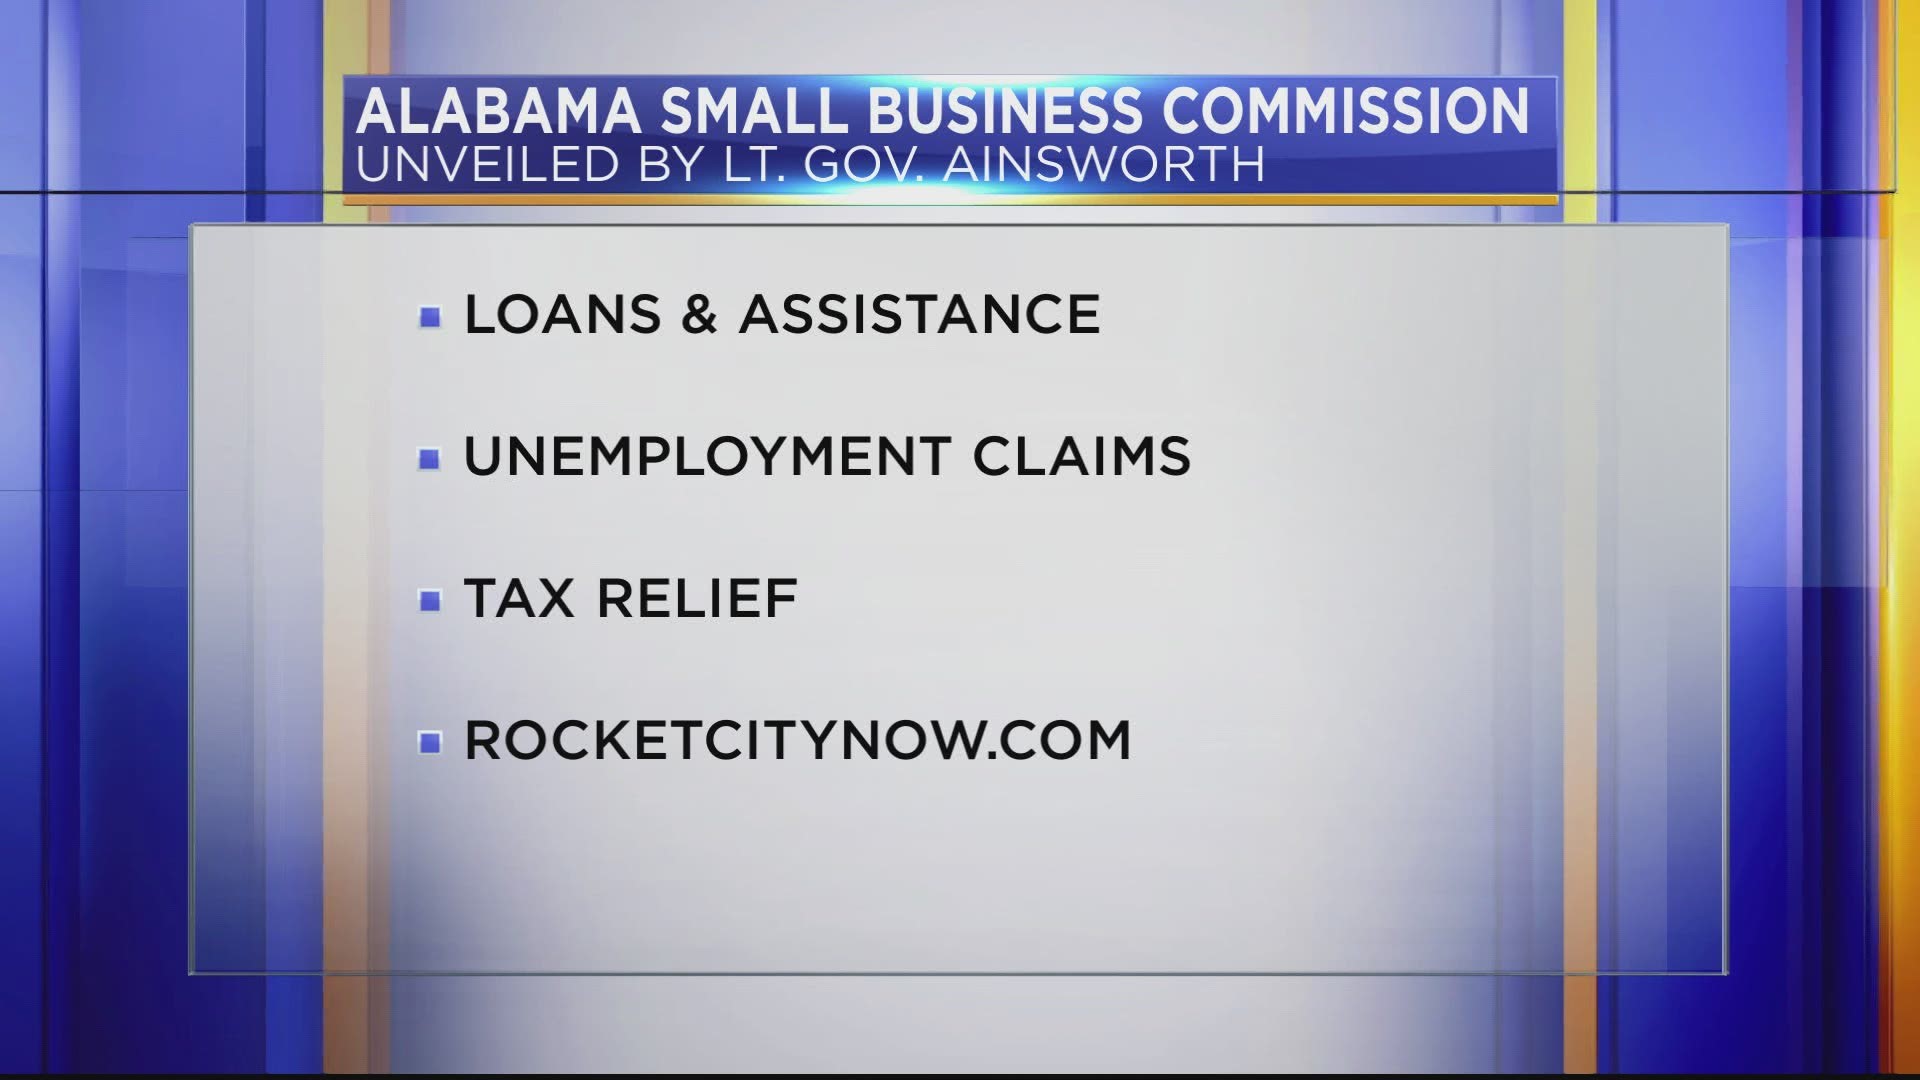 Alabama now has a one-stop online resource for Alabama small businesses to get help during the COVID-19 crisis.